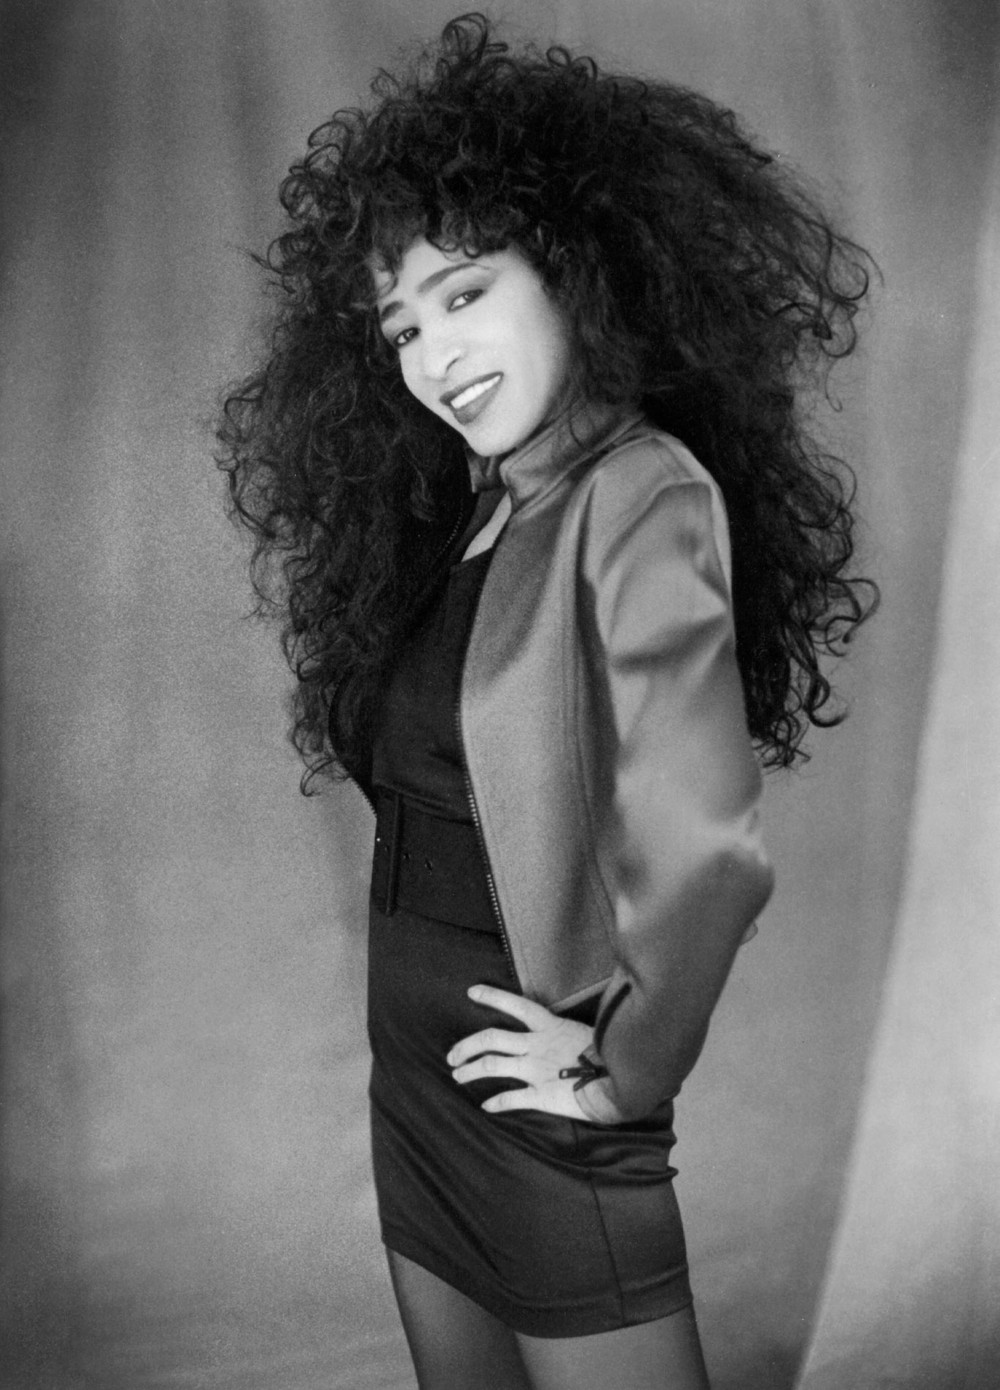 The Bad Girl Of Rock N Roll Fascinating Vintage Photos Of A Young Ronnie Spector In The 1960s